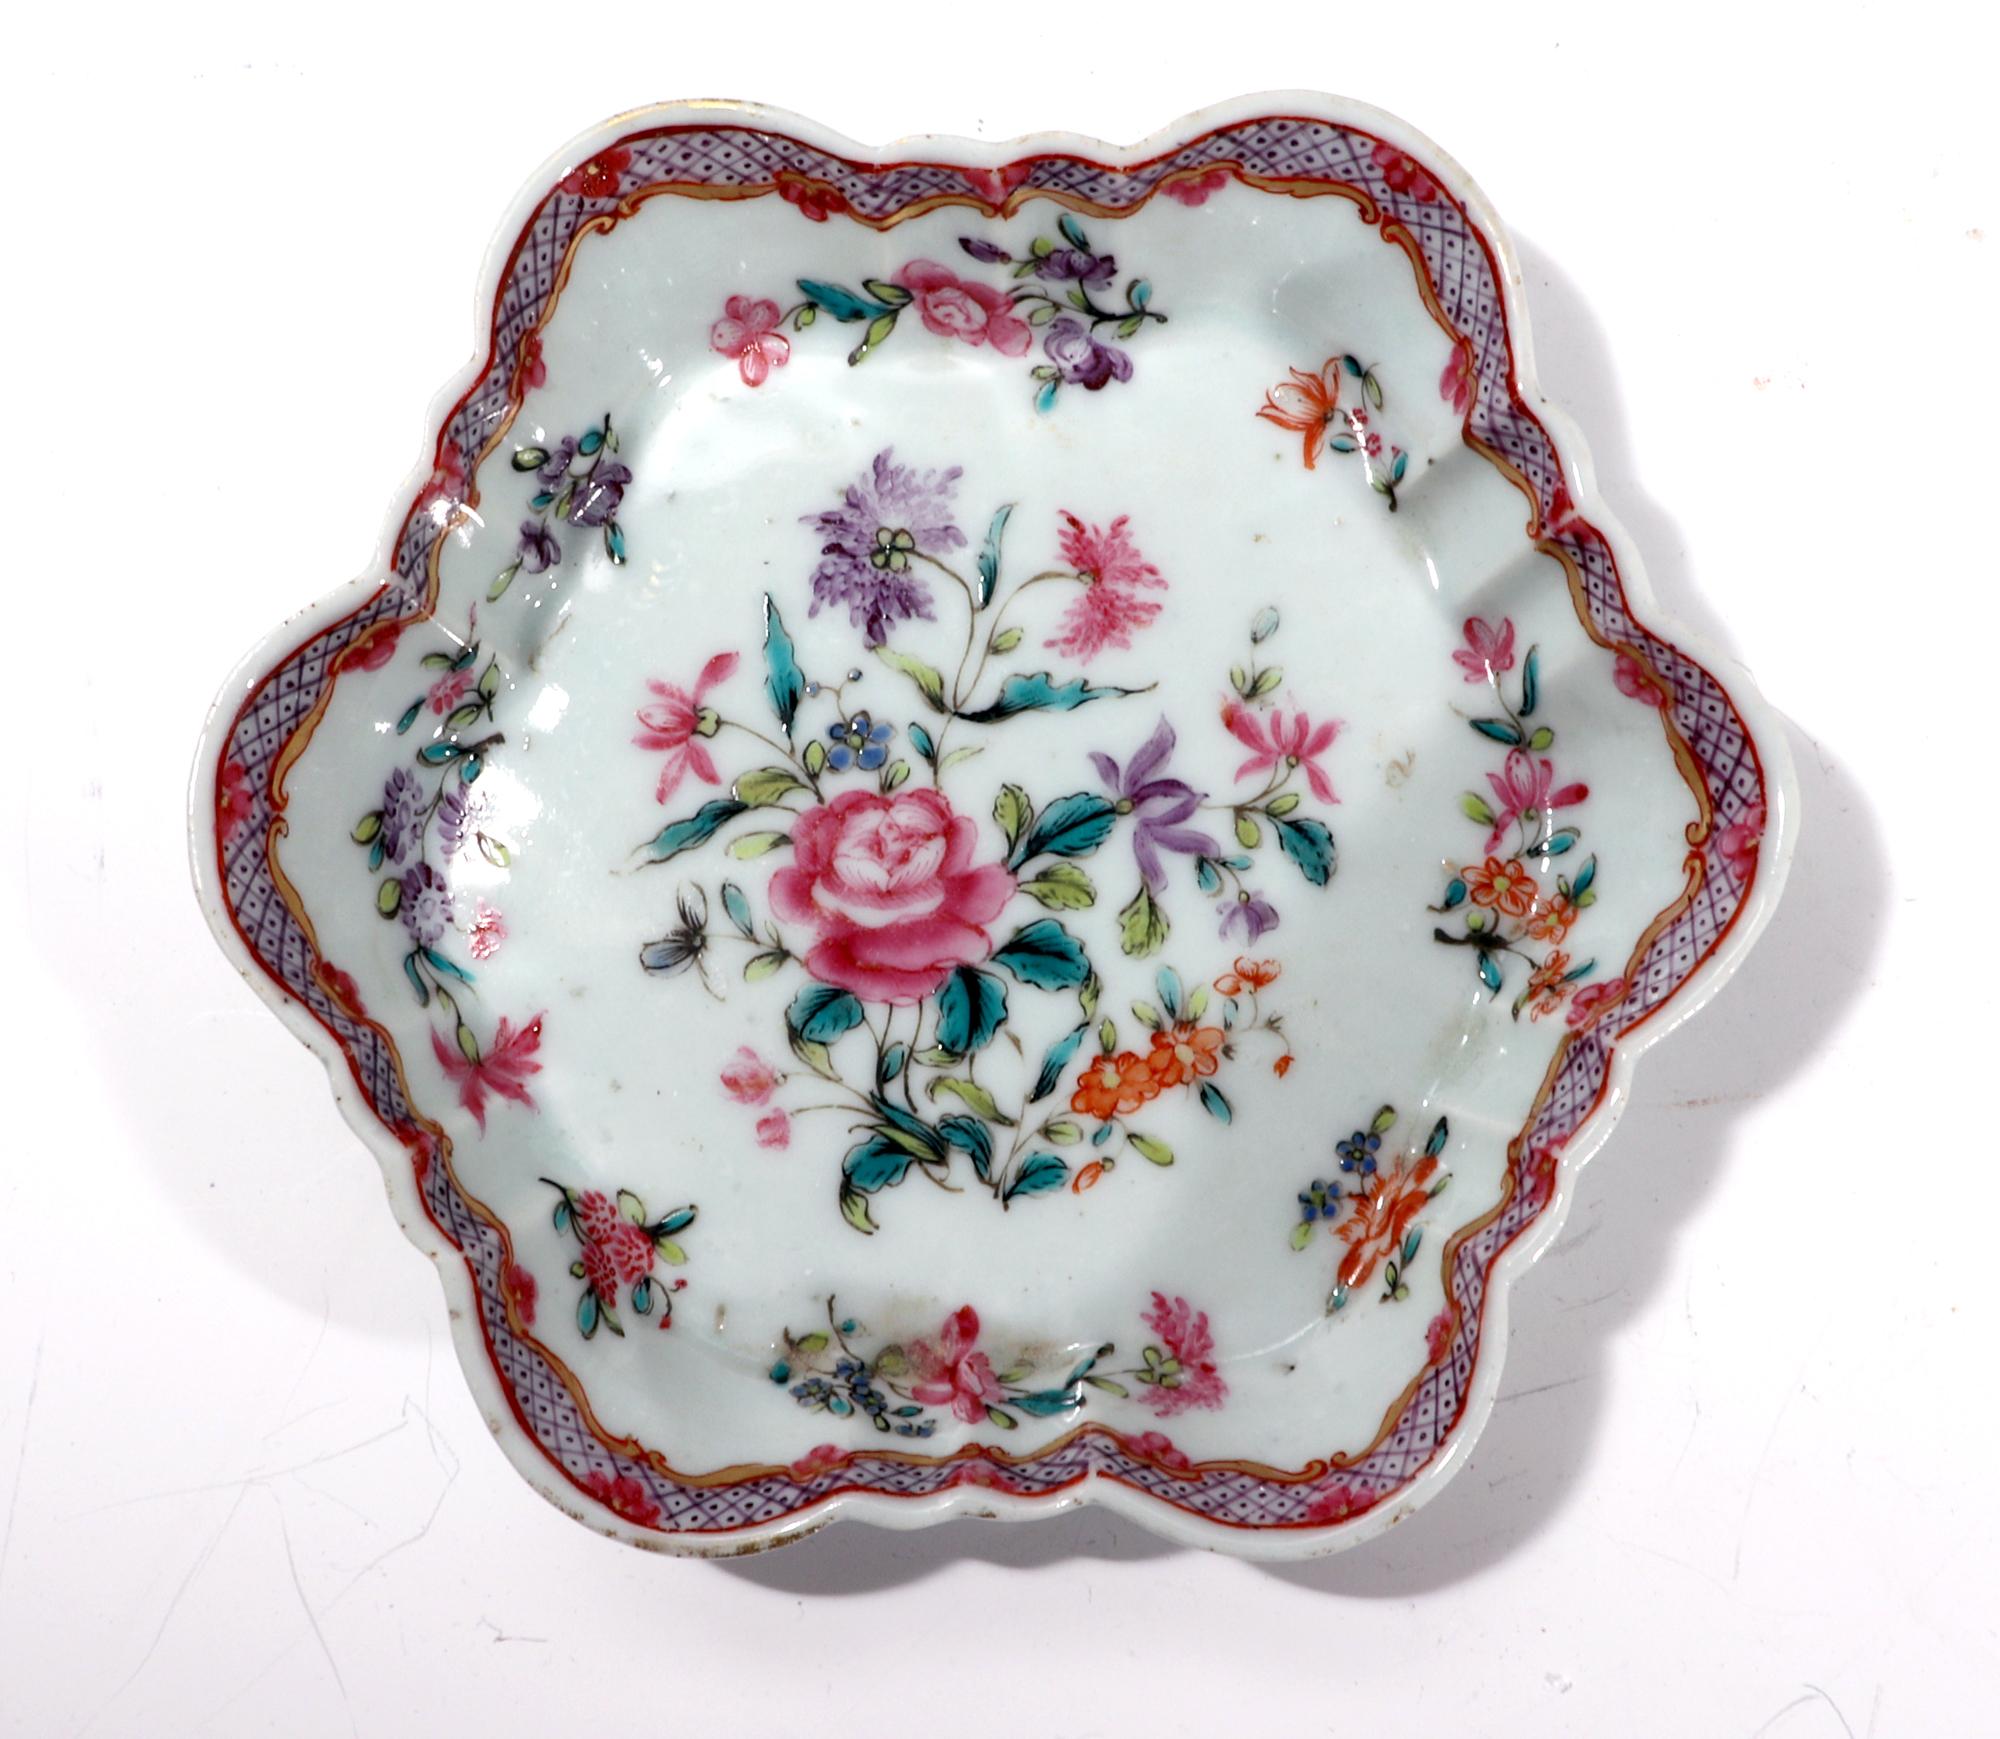 Chinese Export porcelain famille rose botanical teapot stand,
circa 1775

The attractive Chinese Export porcelain teapot stand is of hexagonal form with raised shaped sides. The center depicts a large groupings of famille rose flowers and leaves